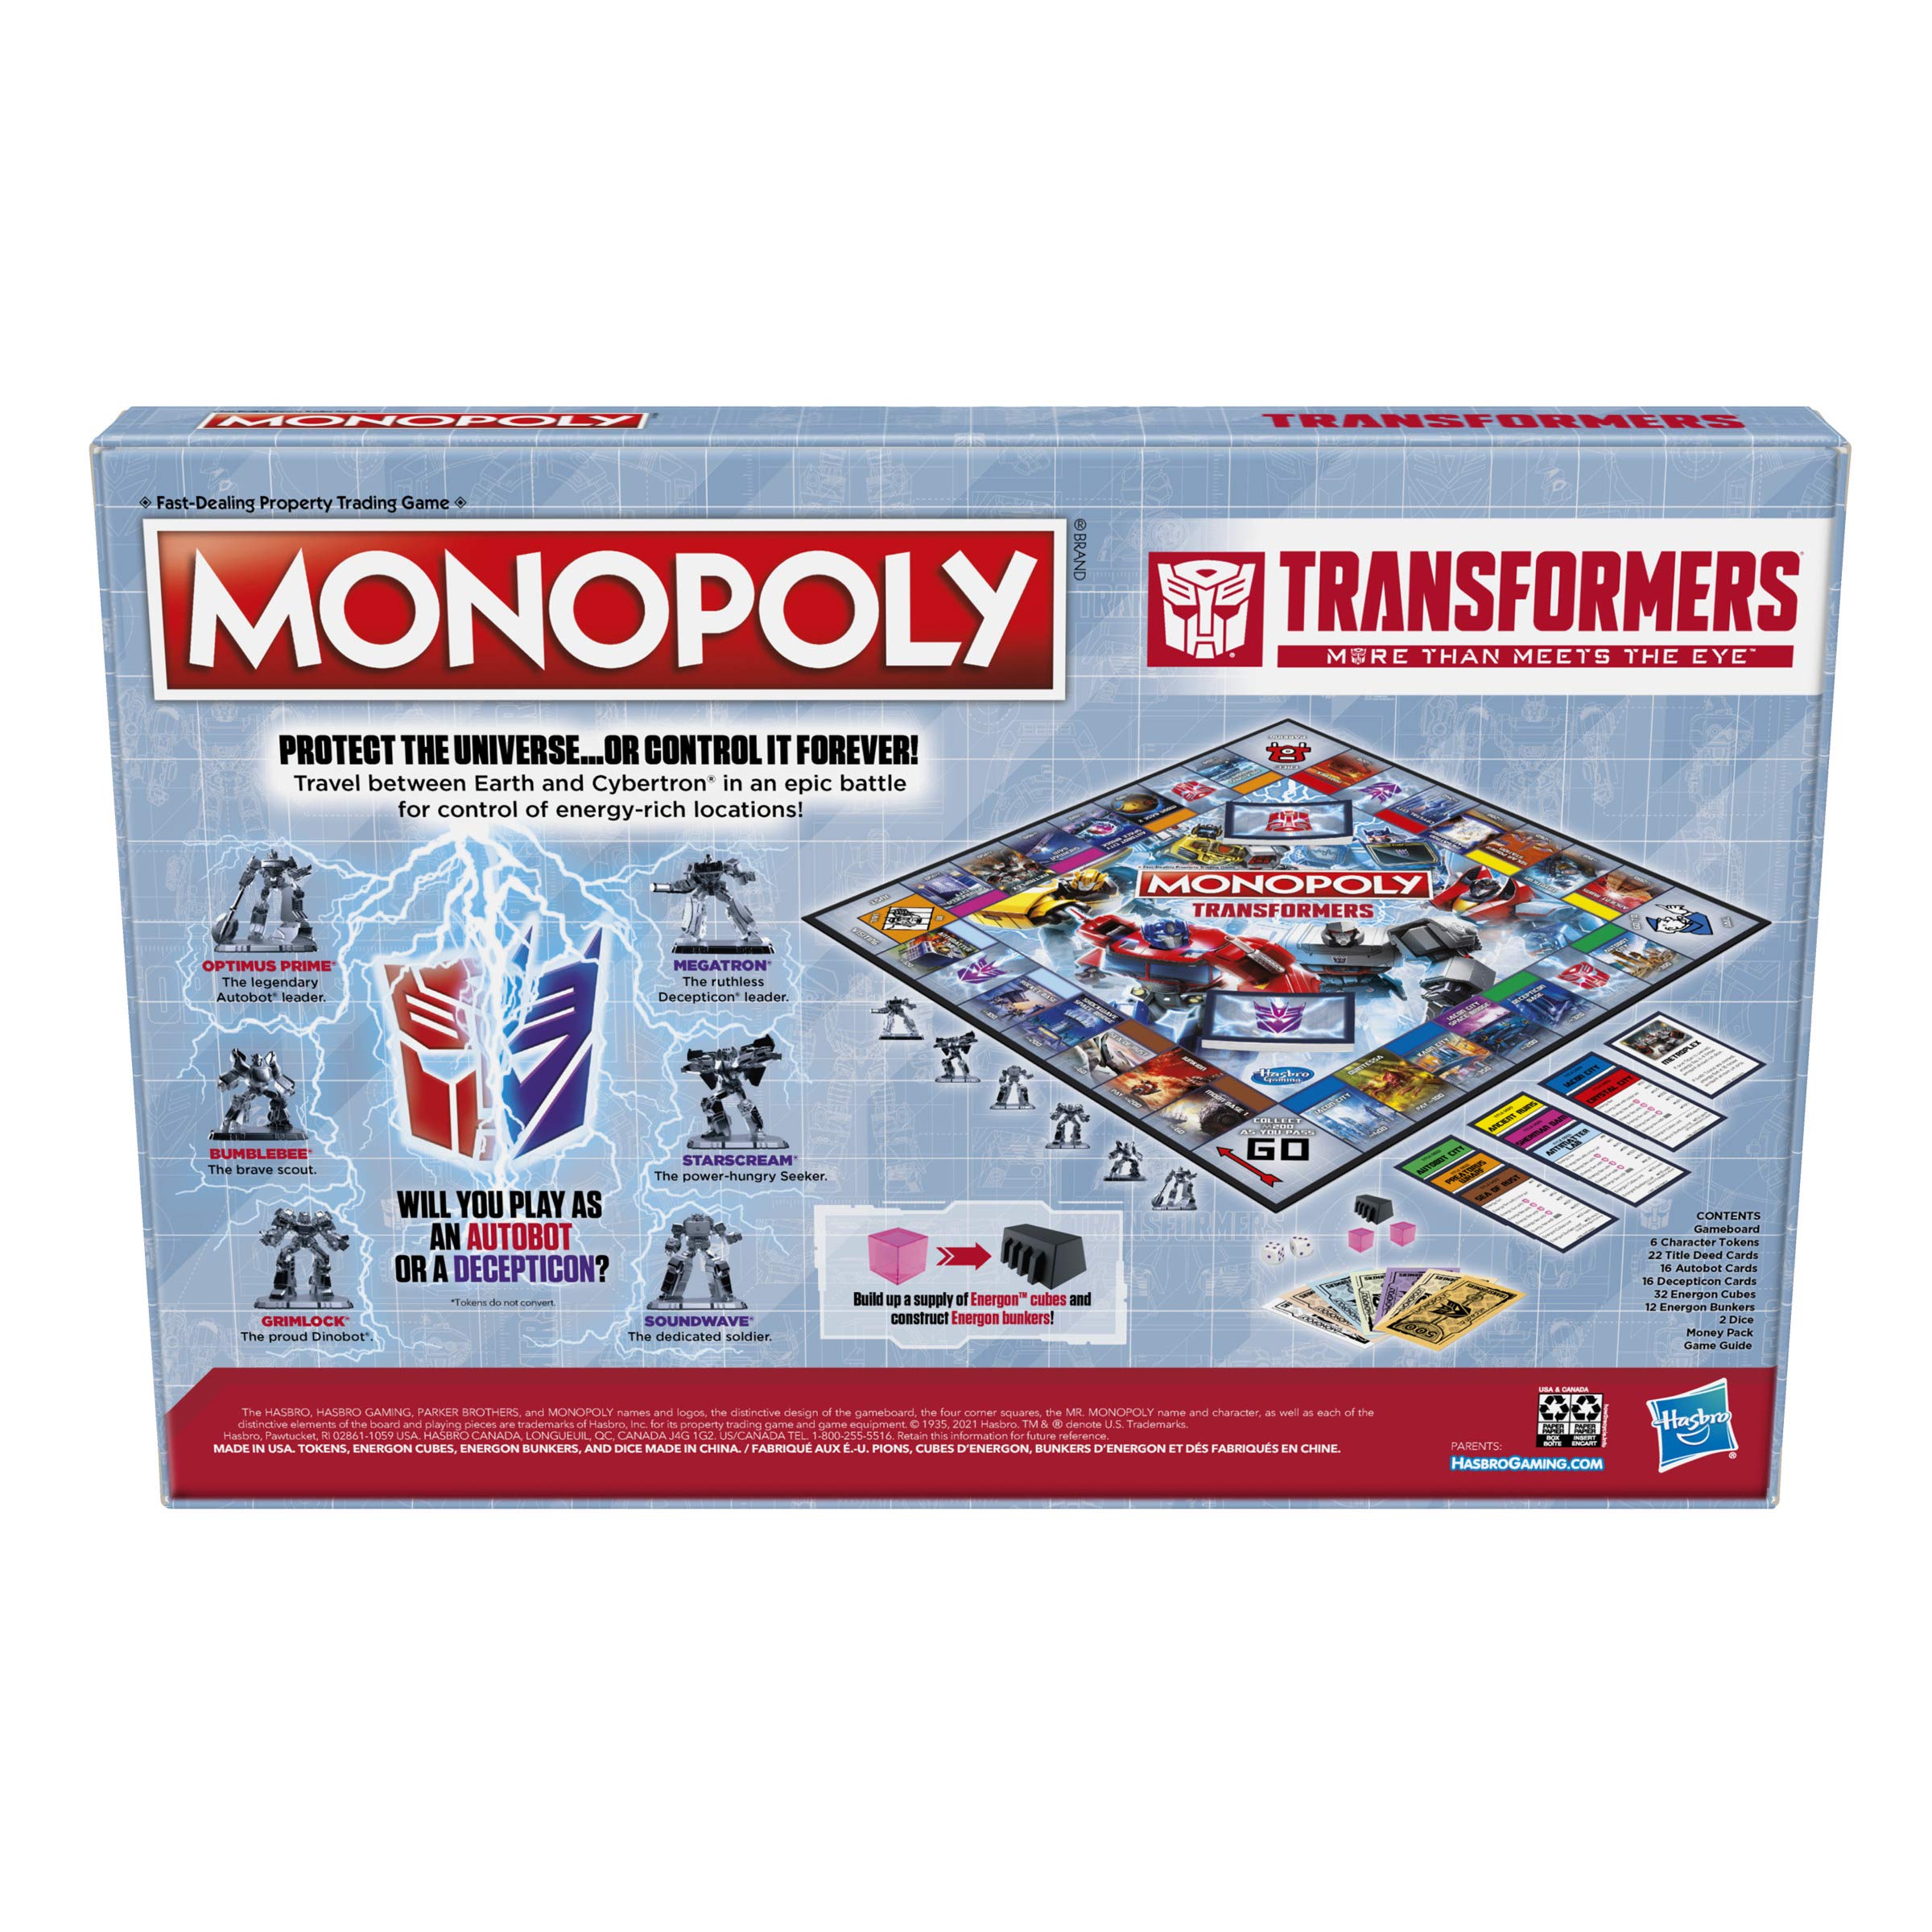 MONOPOLY: Transformers Edition Board Game for 2-6 Players Kids Ages 8 and Up, Includes Autobot and Decepticon Tokens